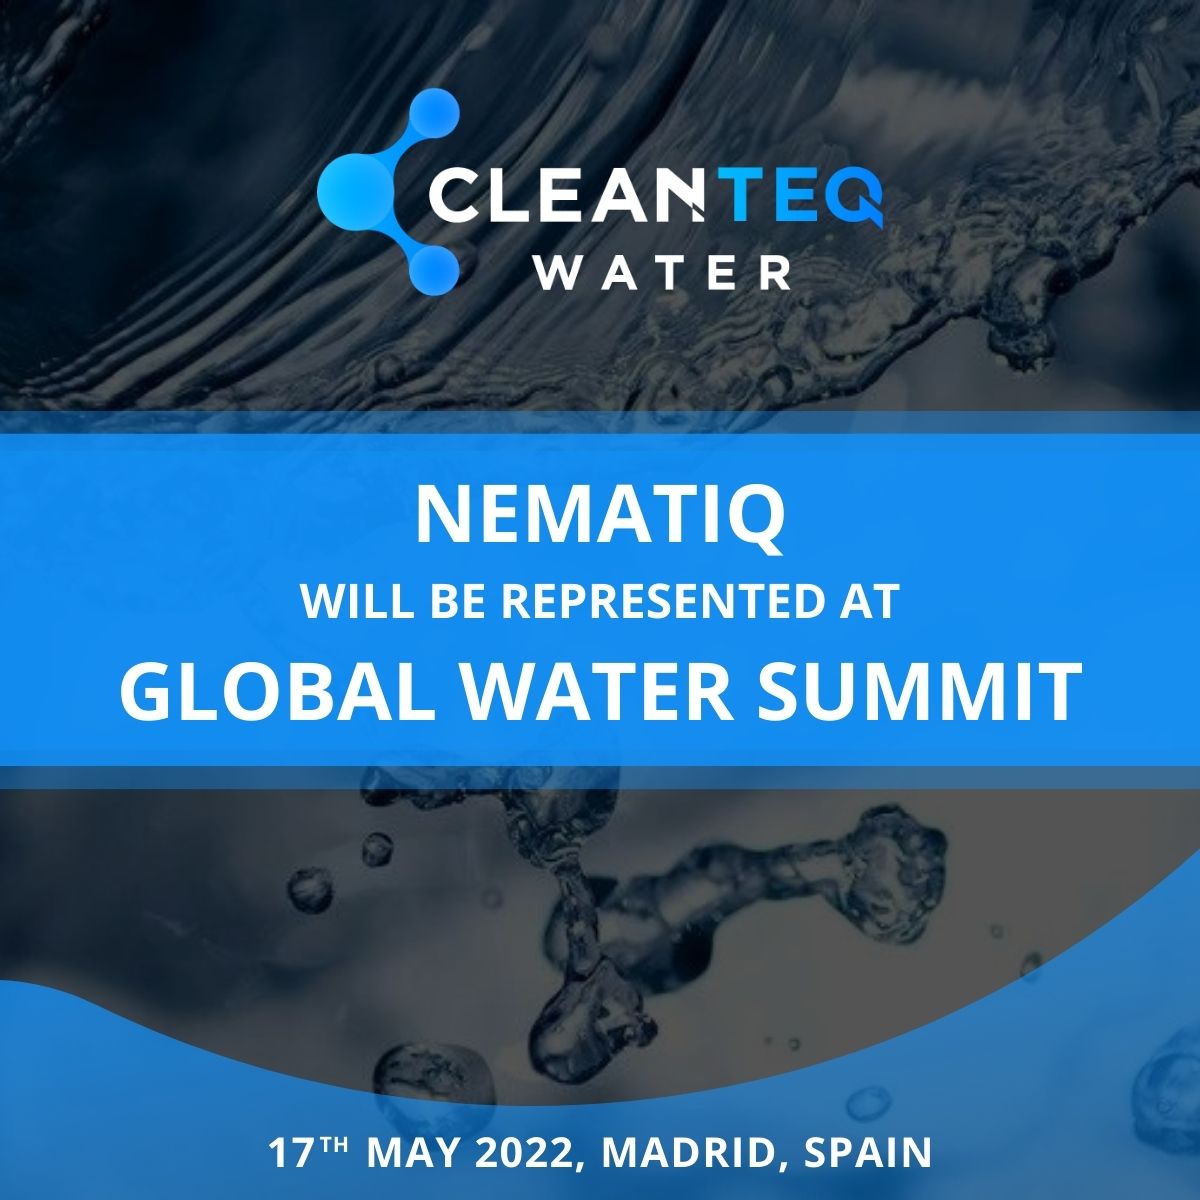 NematiQ will be represented at this year’s GWS Technology Idol event to be held on 17th May, during Madrid, Spain Summit.